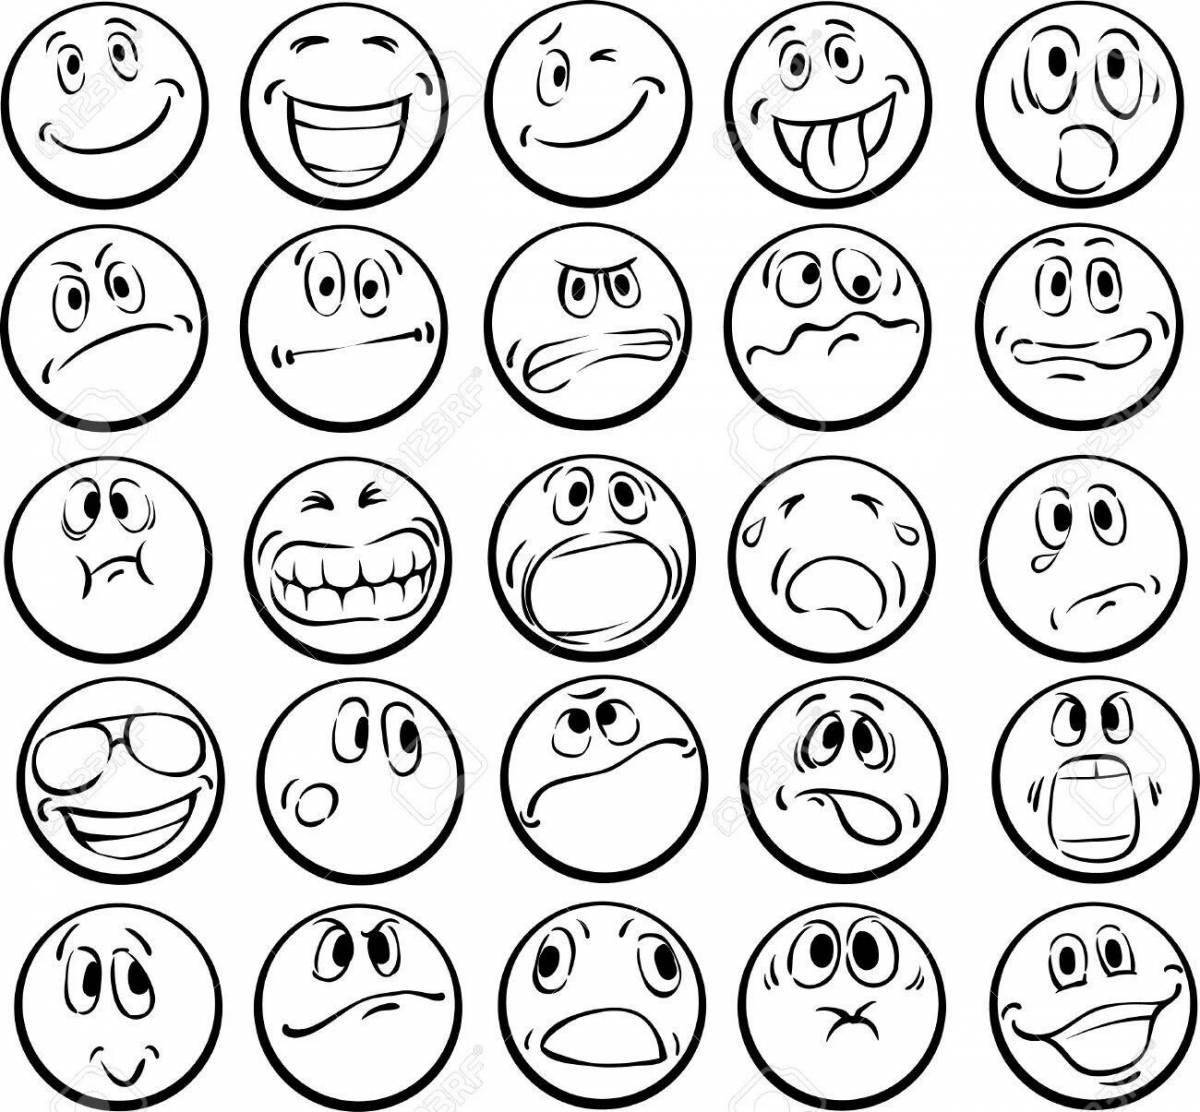 Coloring funny smileys, small